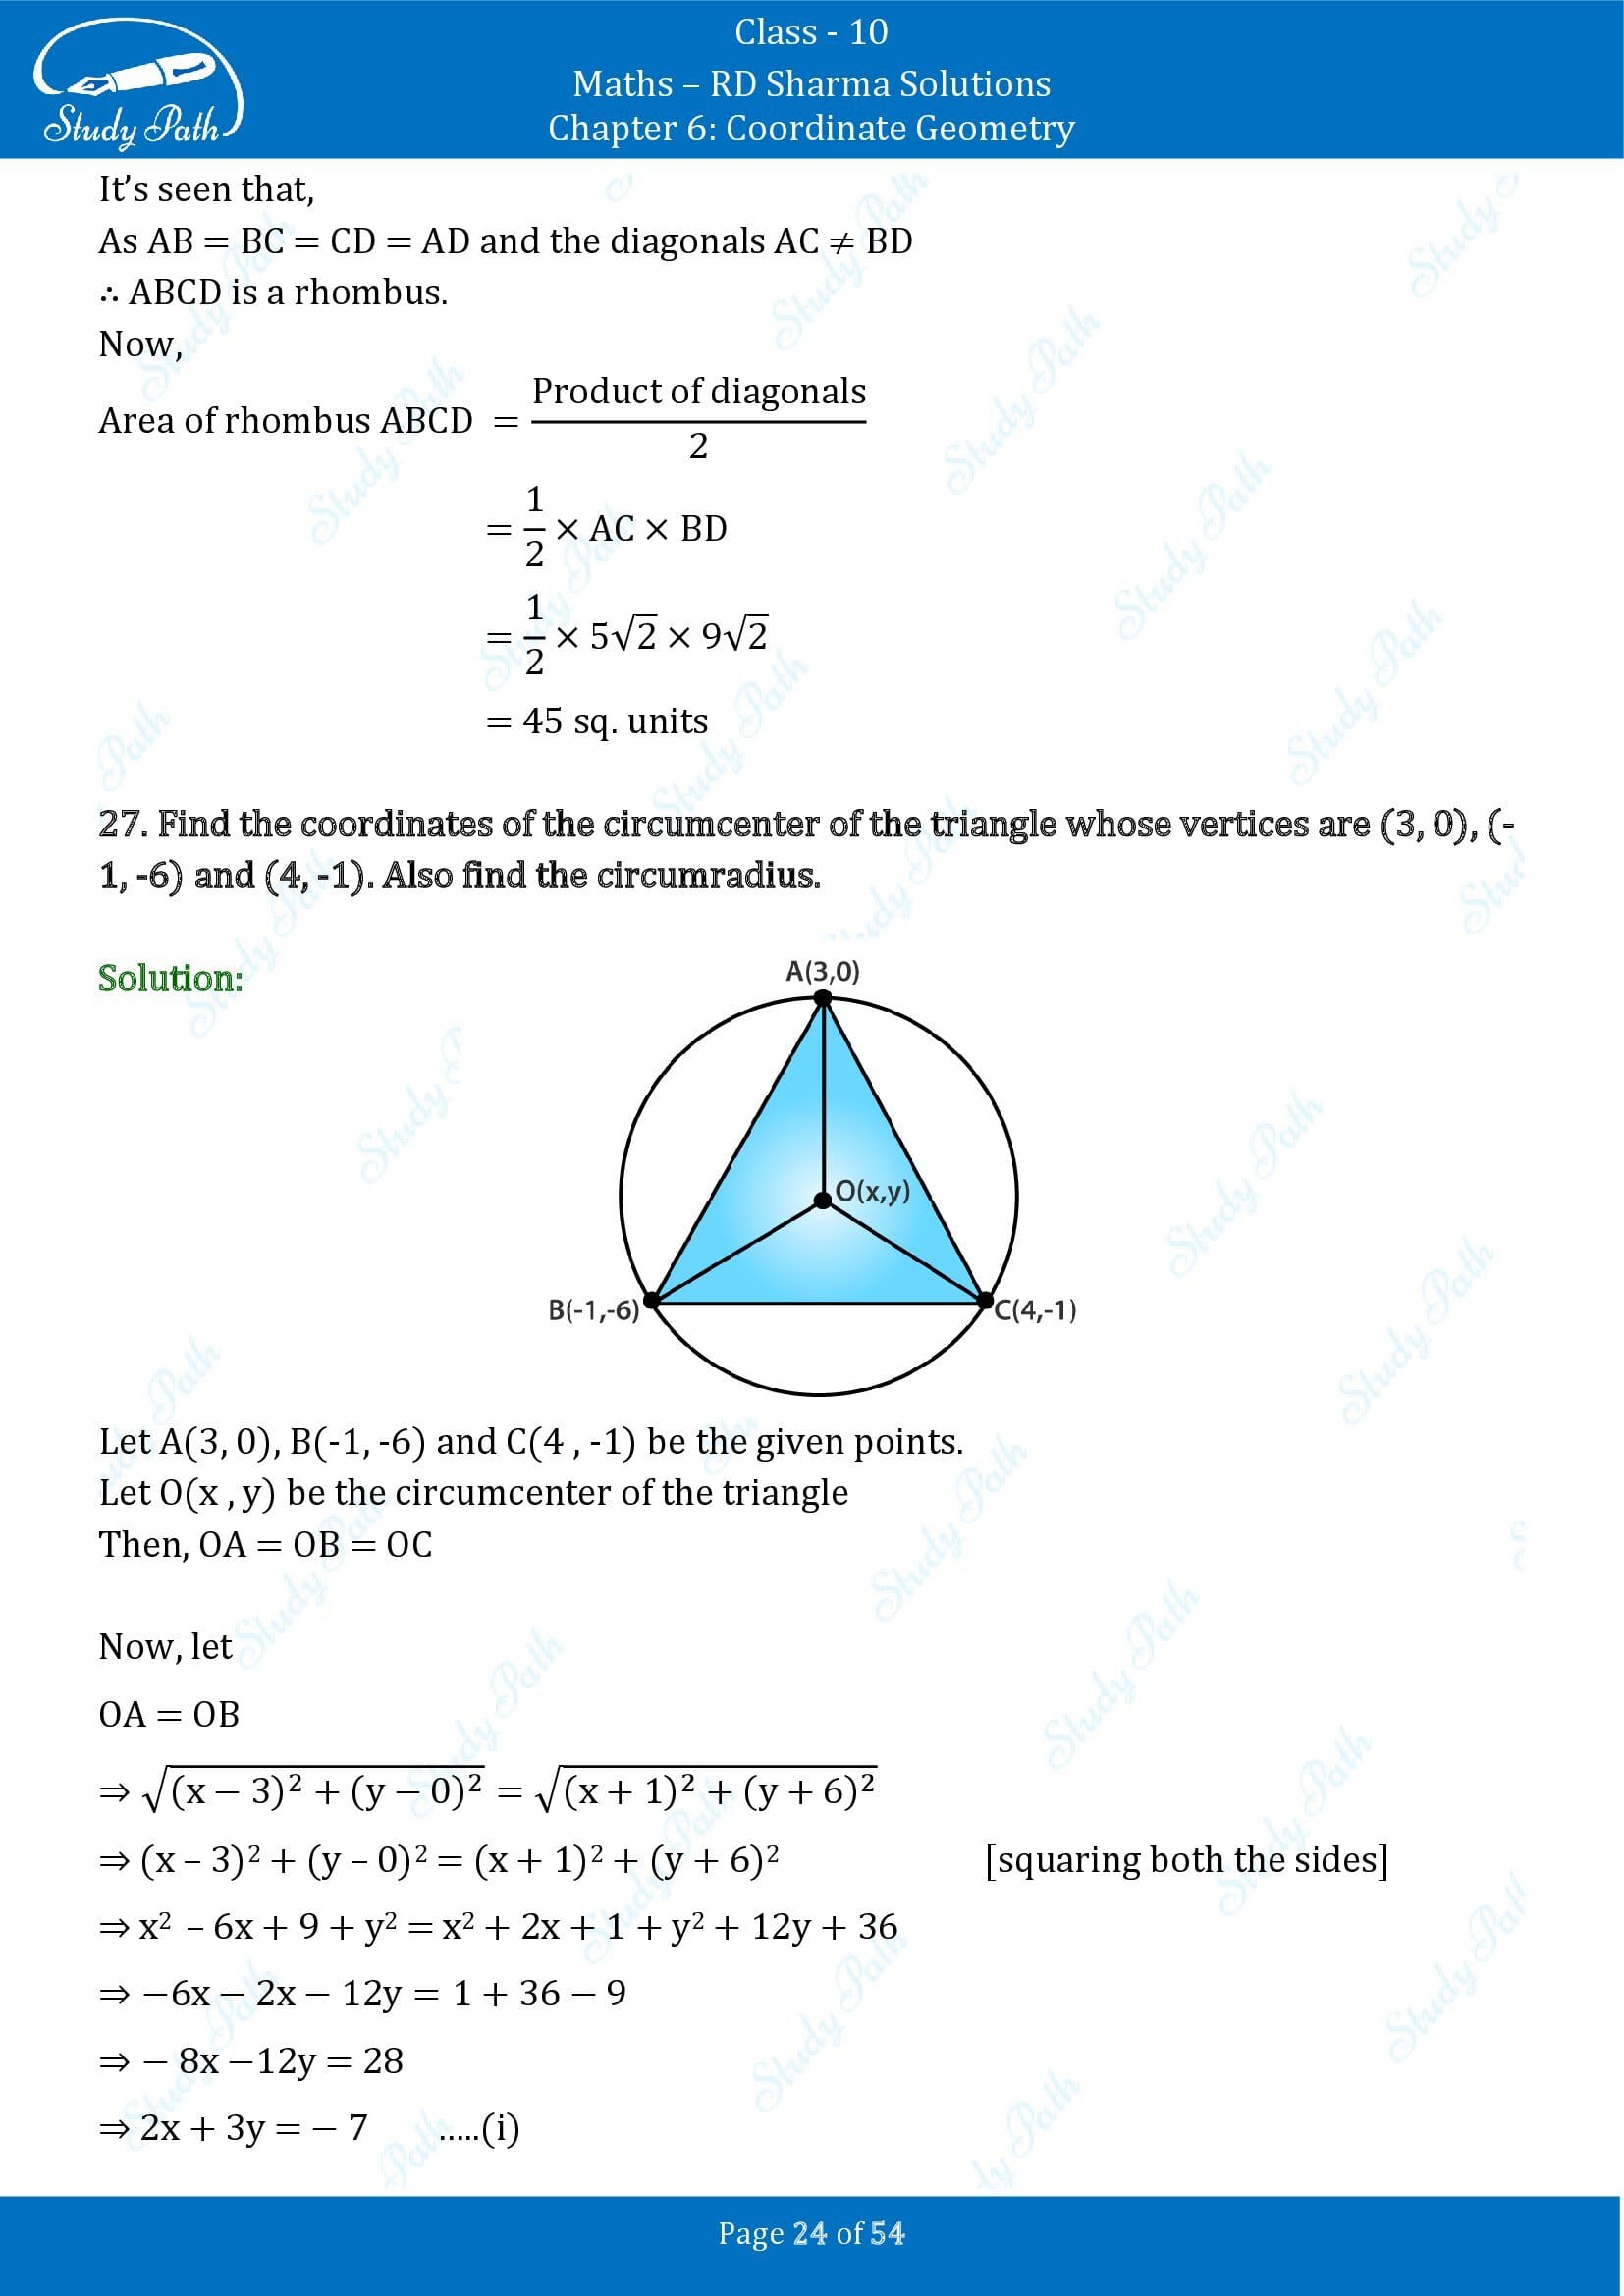 RD Sharma Solutions Class 10 Chapter 6 Coordinate Geometry Exercise 6.2 0024